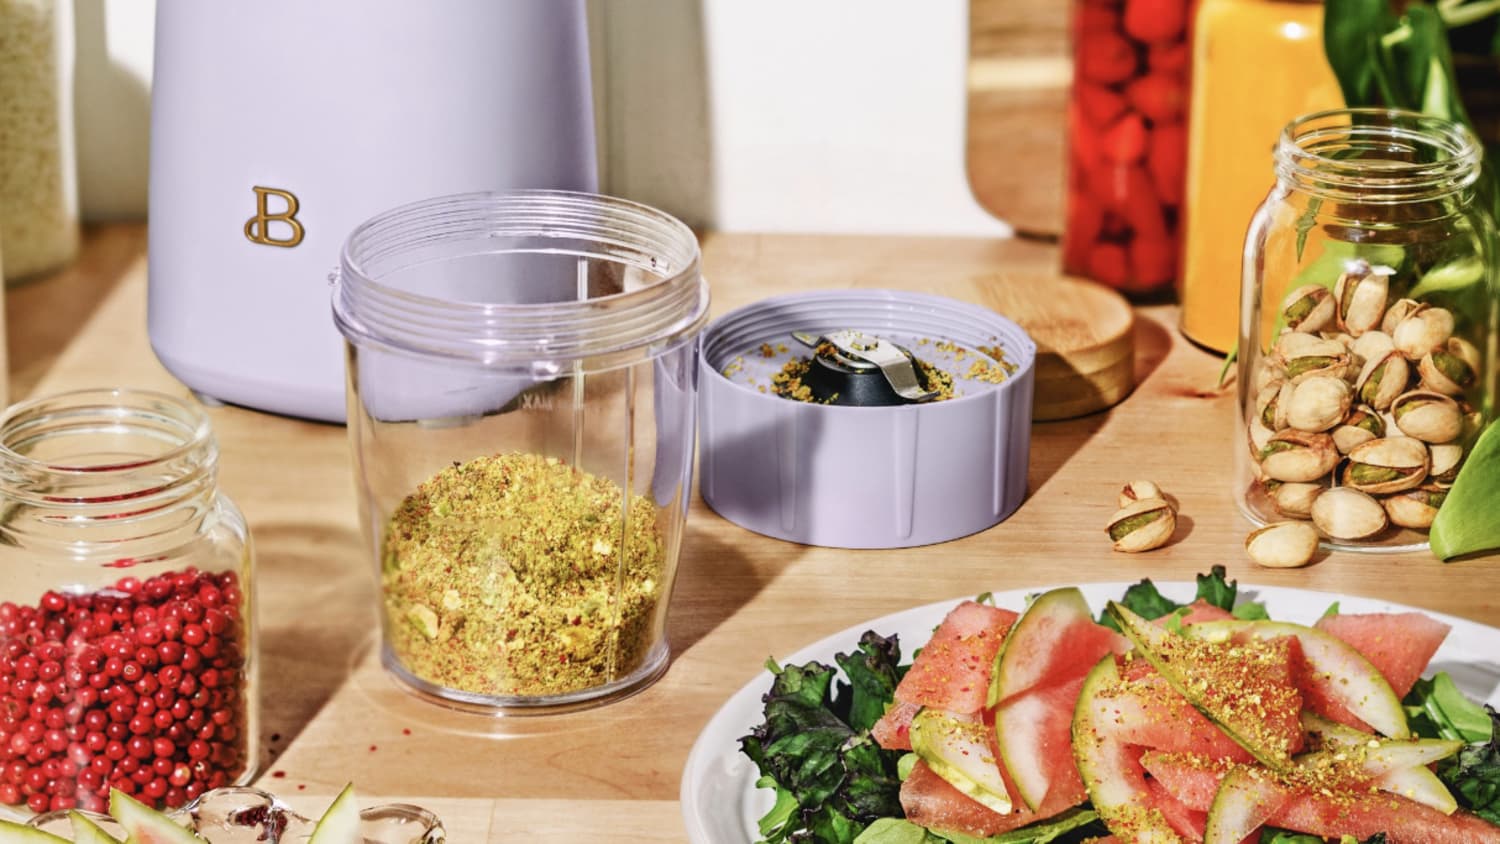 Drew Barrymore's Beautiful Kitchen Line Launches New Mixer Collection